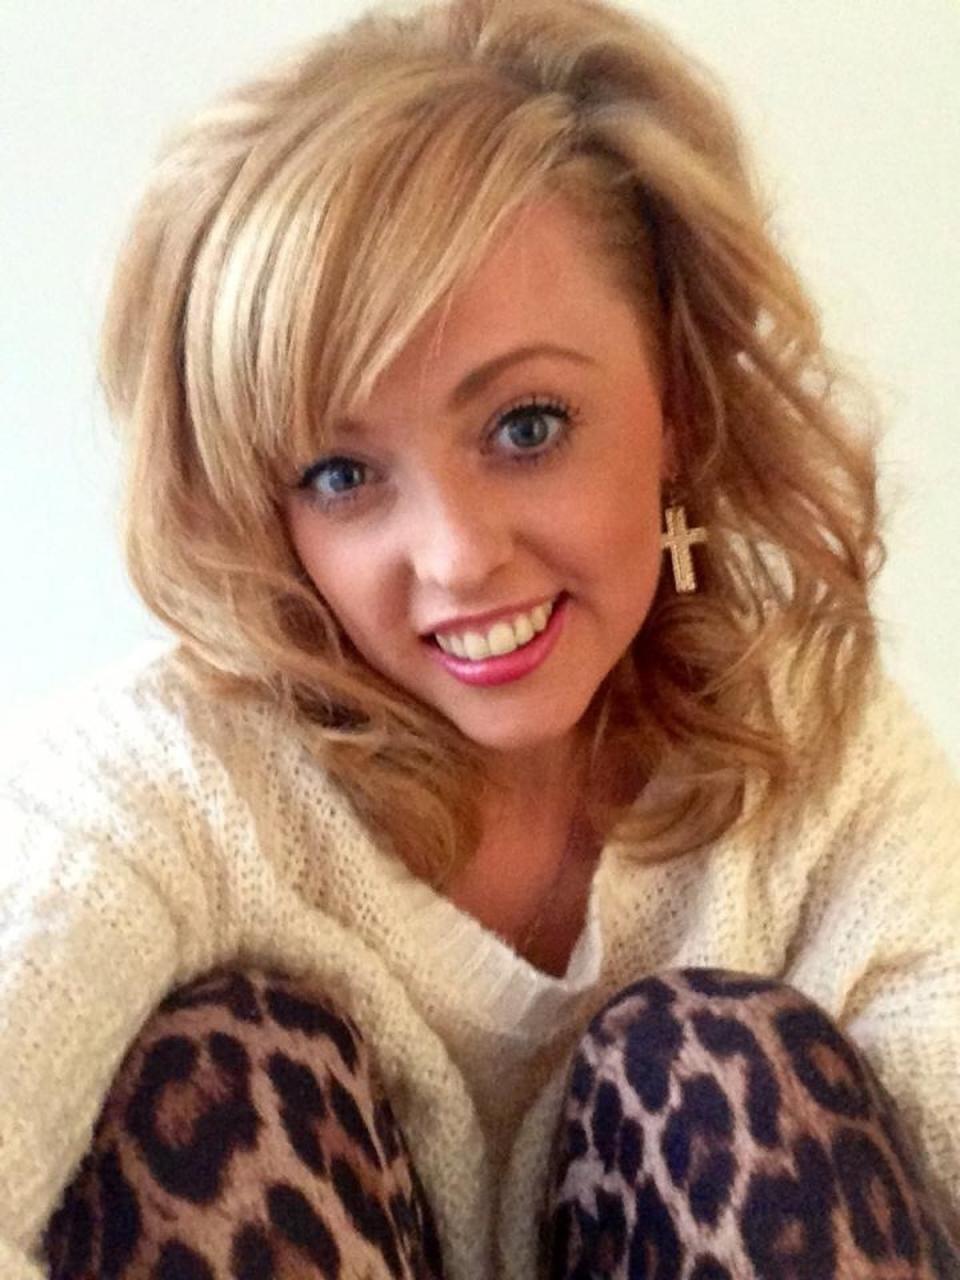 Hollie Gazzard was stabbed to death by her ex-boyfriend in the hair salon where she worked (Provided)